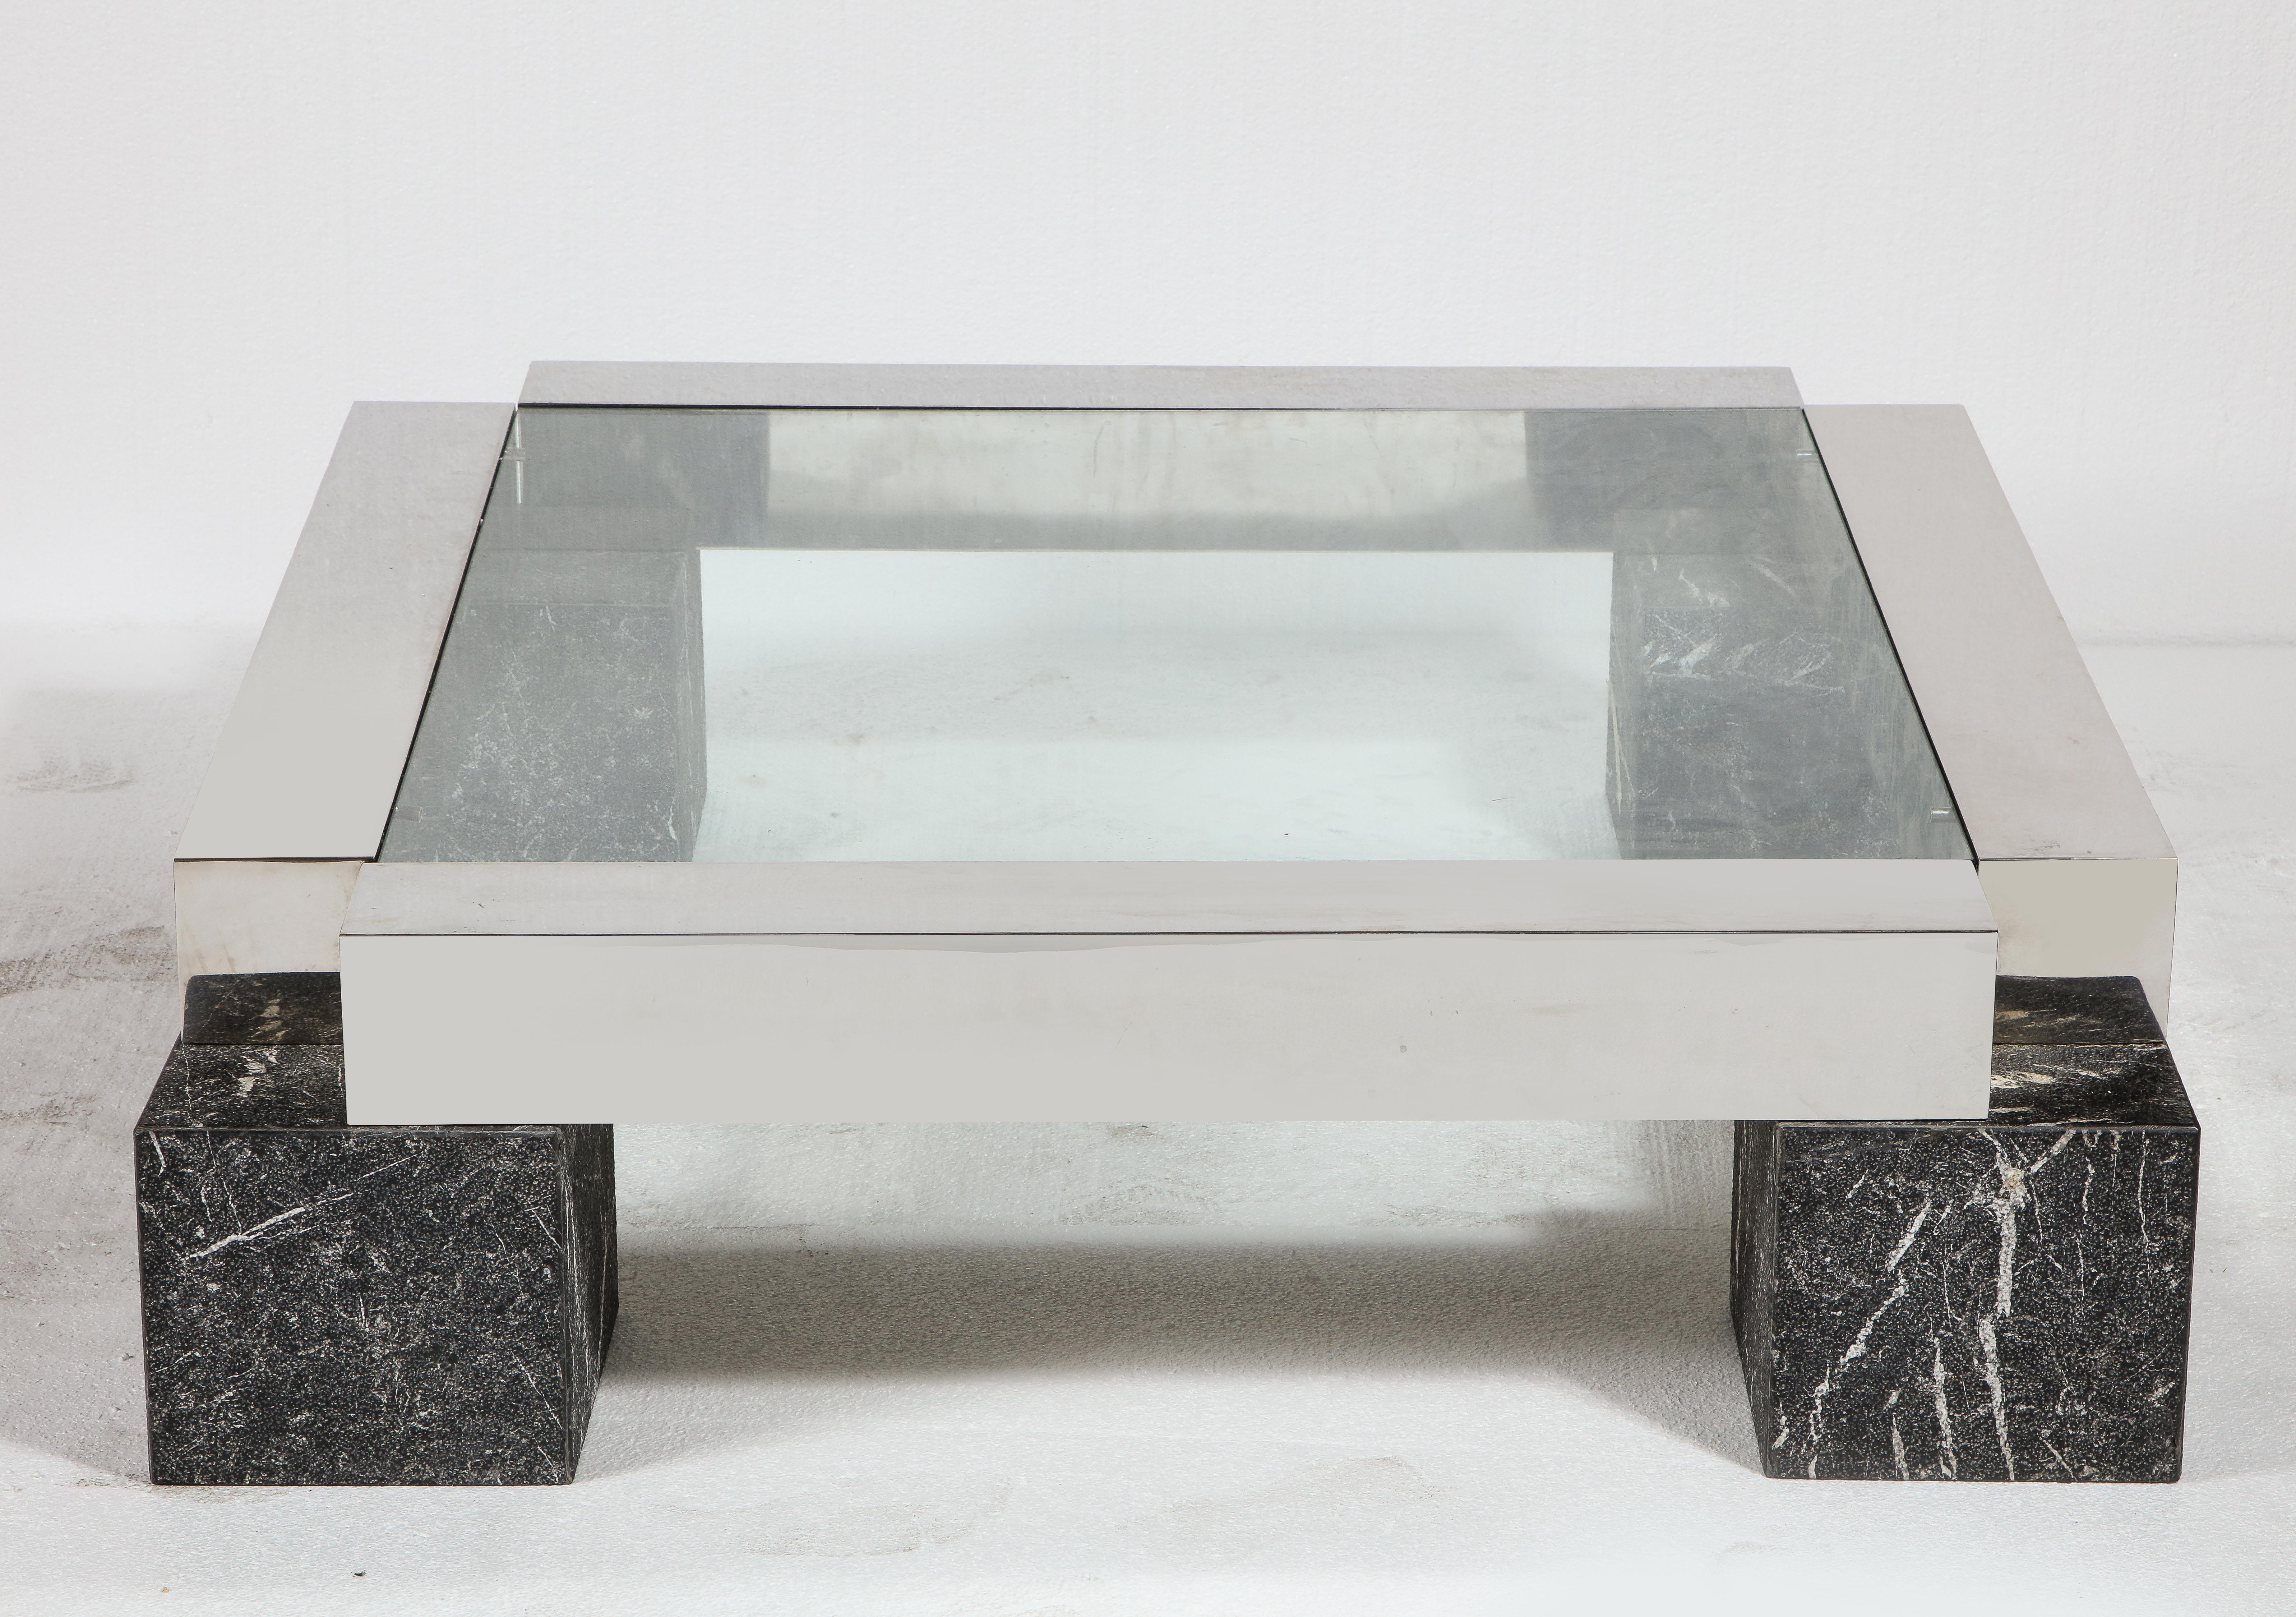 Vintage monumental steel marble black square coffee table, France.

Chic black marble/granite and steel glass coffee table, chic in any modern decor. Large size. This table is thought to be made circa 1970s-1980s.